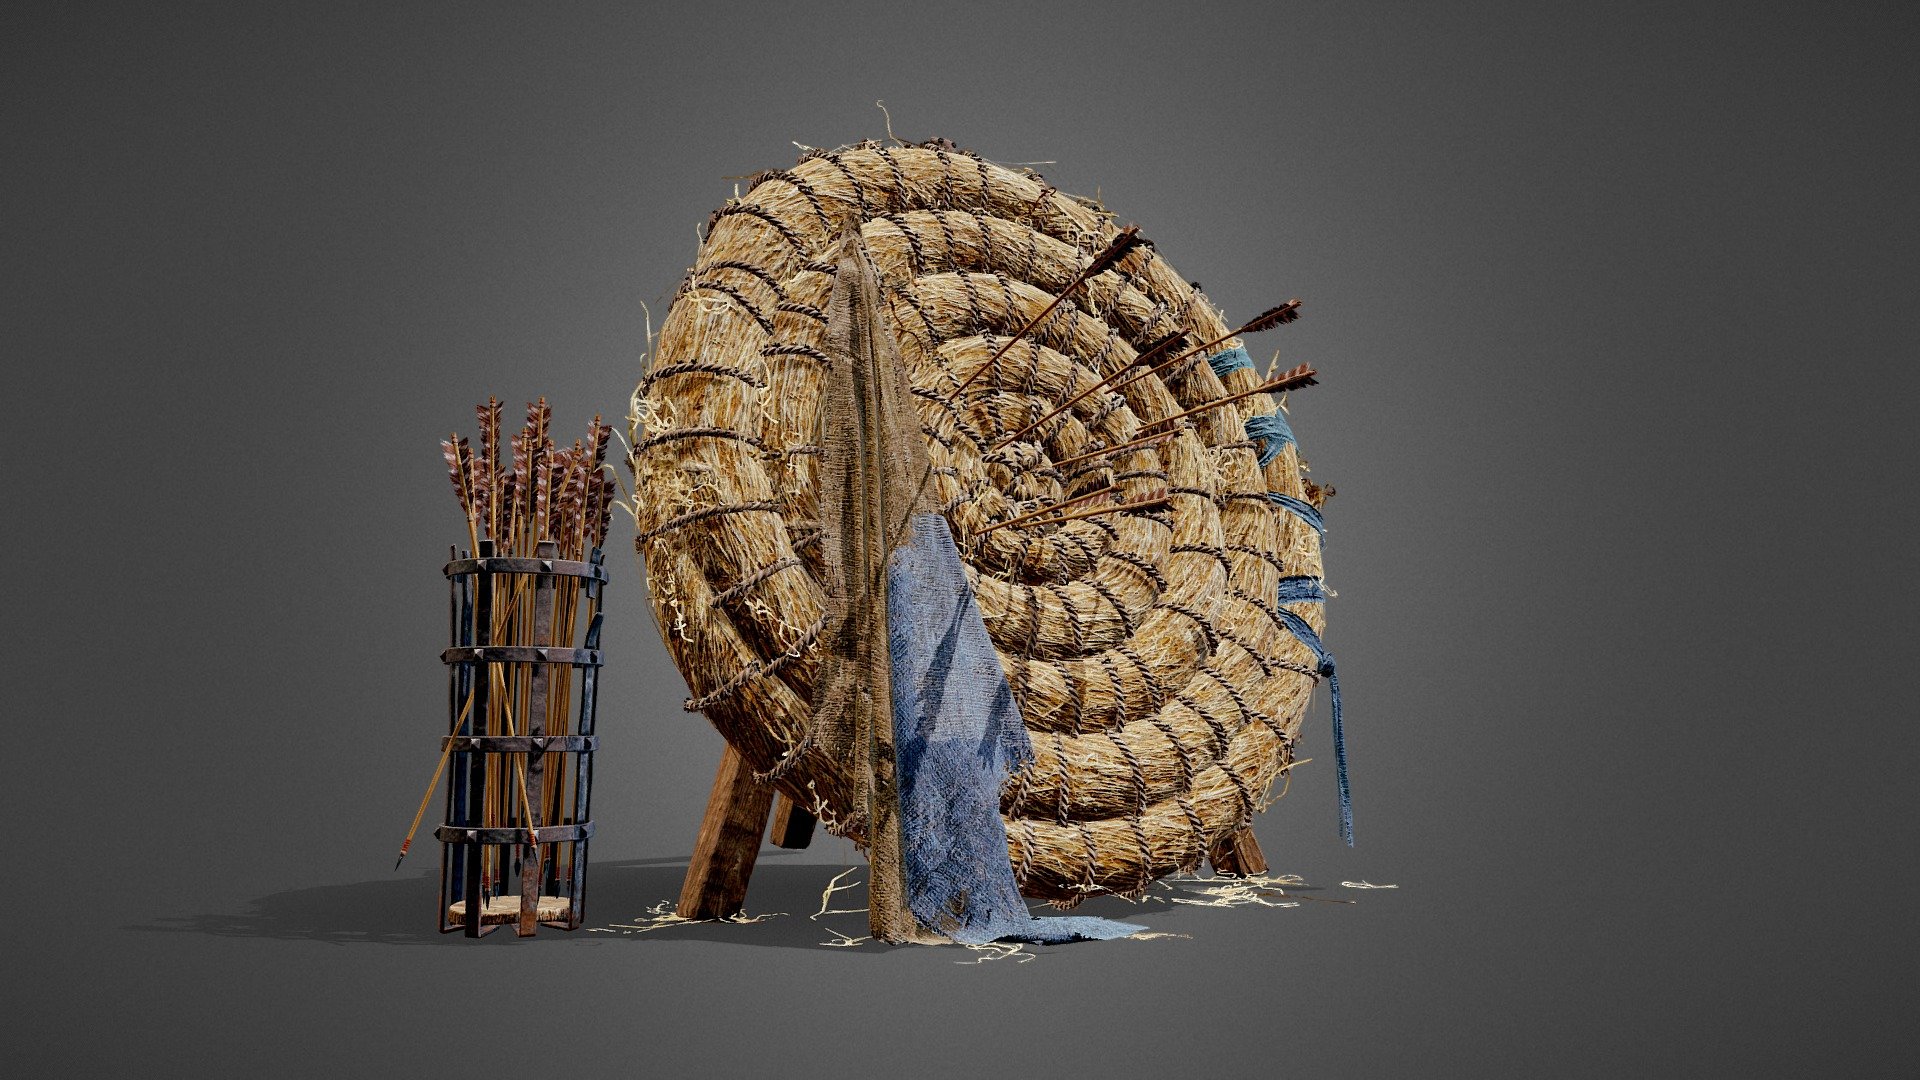 Finished another small project, a piece from my favorite medieval setting)
https://artstation.com/artwork/Ea1oON - archery_target - 3D model by KarynaTrychyk 3d model